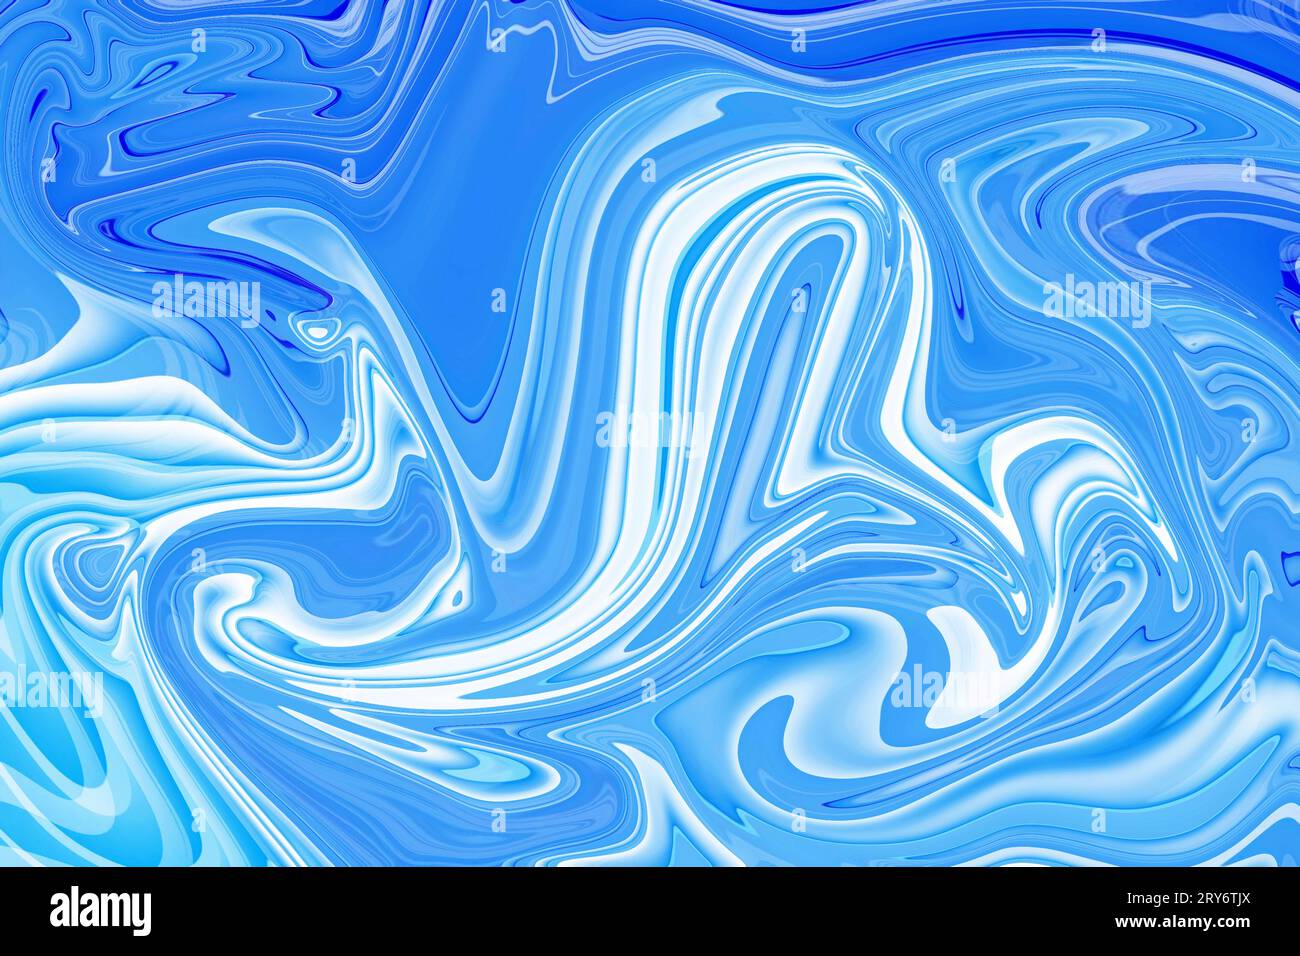 dynamic beauty of swirling hues in abstract creative of blue marble ...